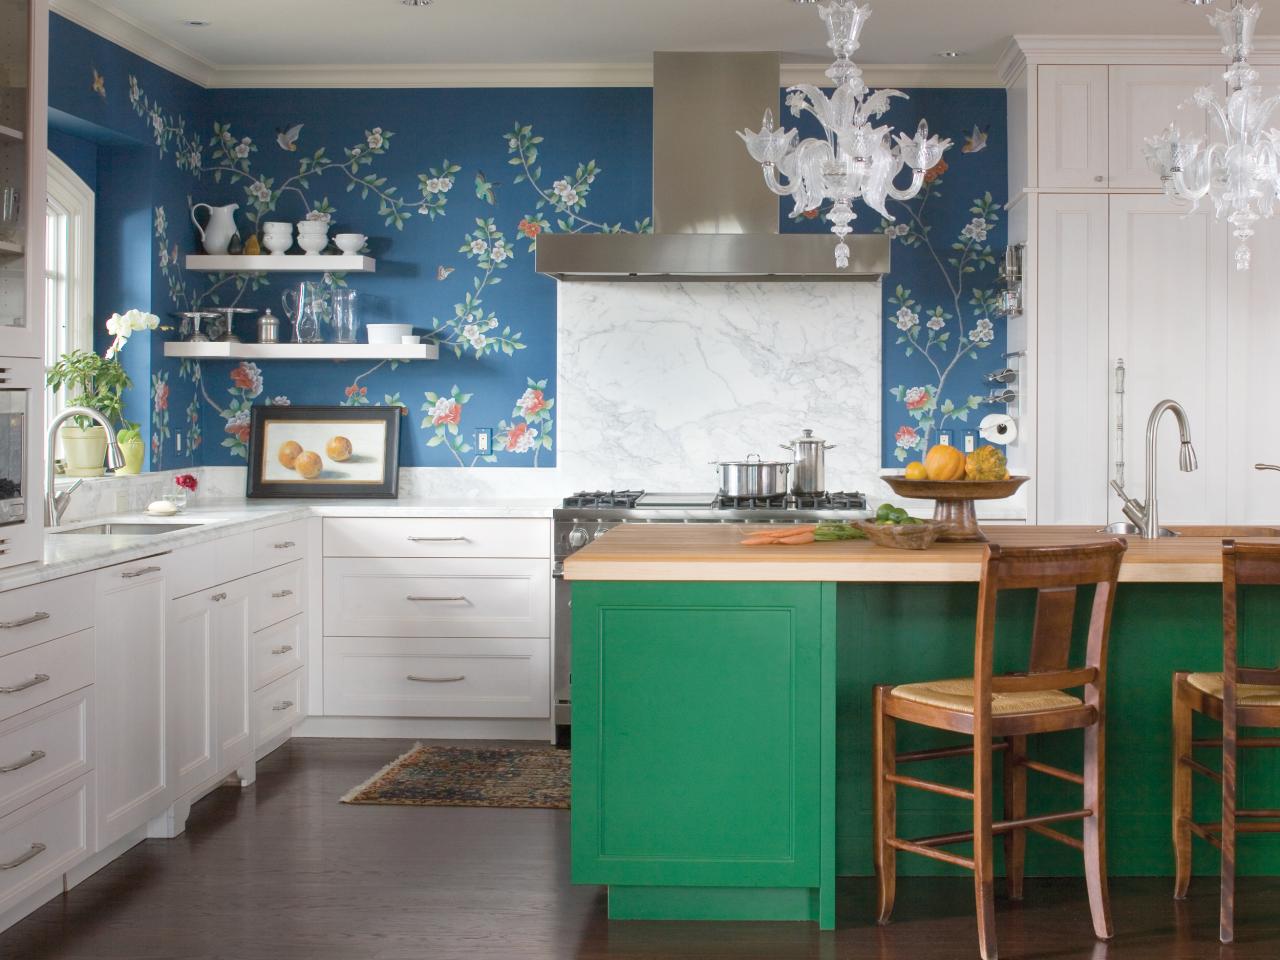 White Kitchen With Blue, Green And Floral Accents - Wall Painting For Kitchen - HD Wallpaper 